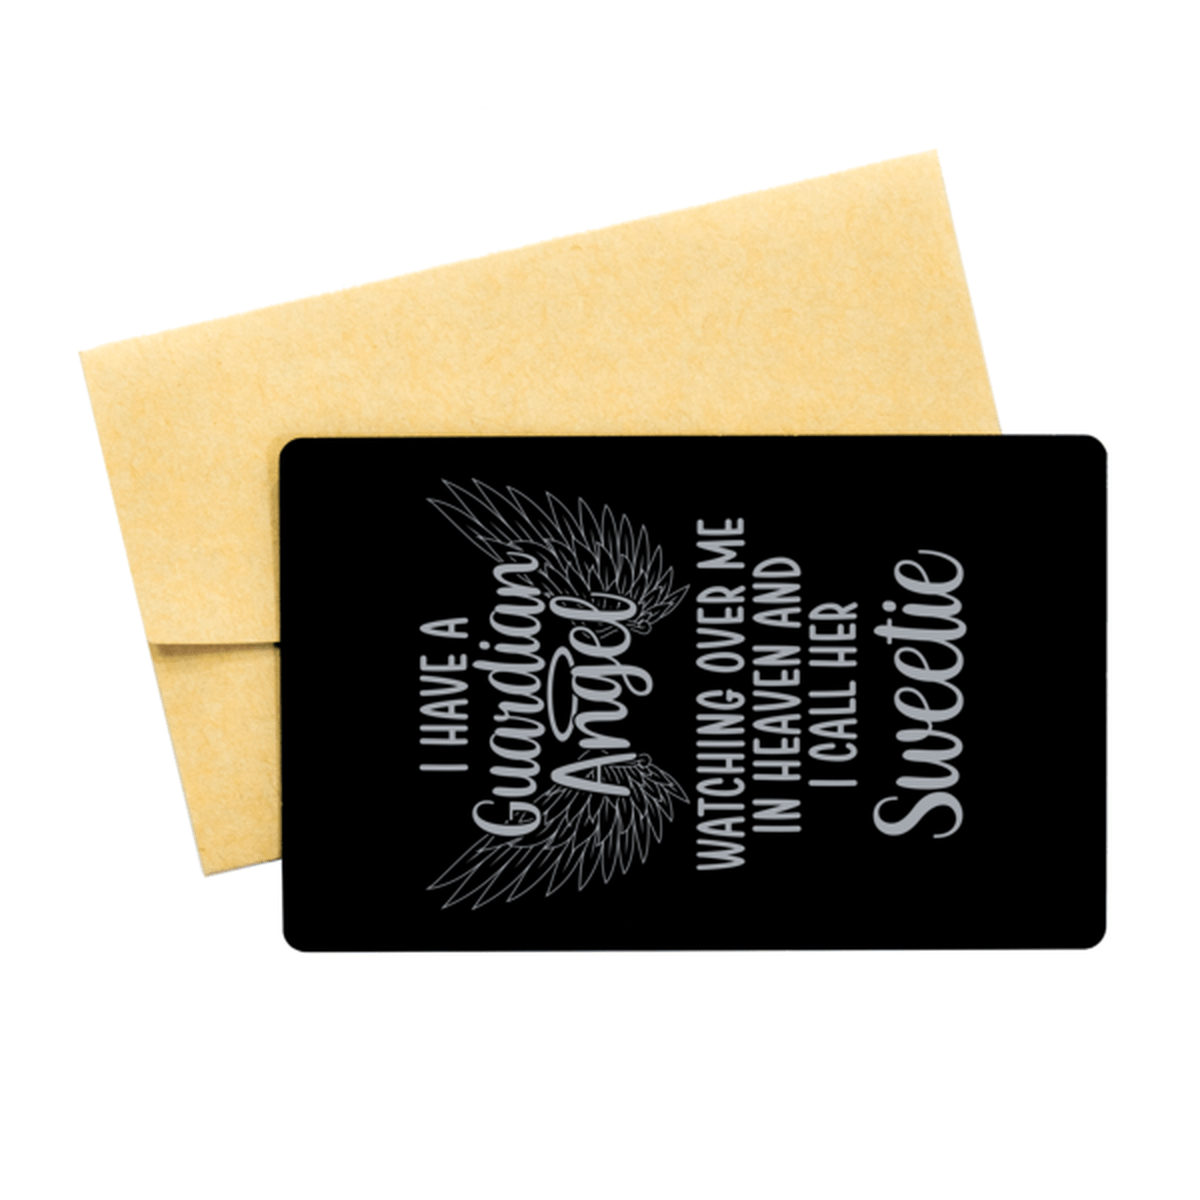 Memorial Sweetie Black Aluminum Card, I Have a Guardian Angel I Call Her Sweetie, Best Remembrance Gifts for Family Friends